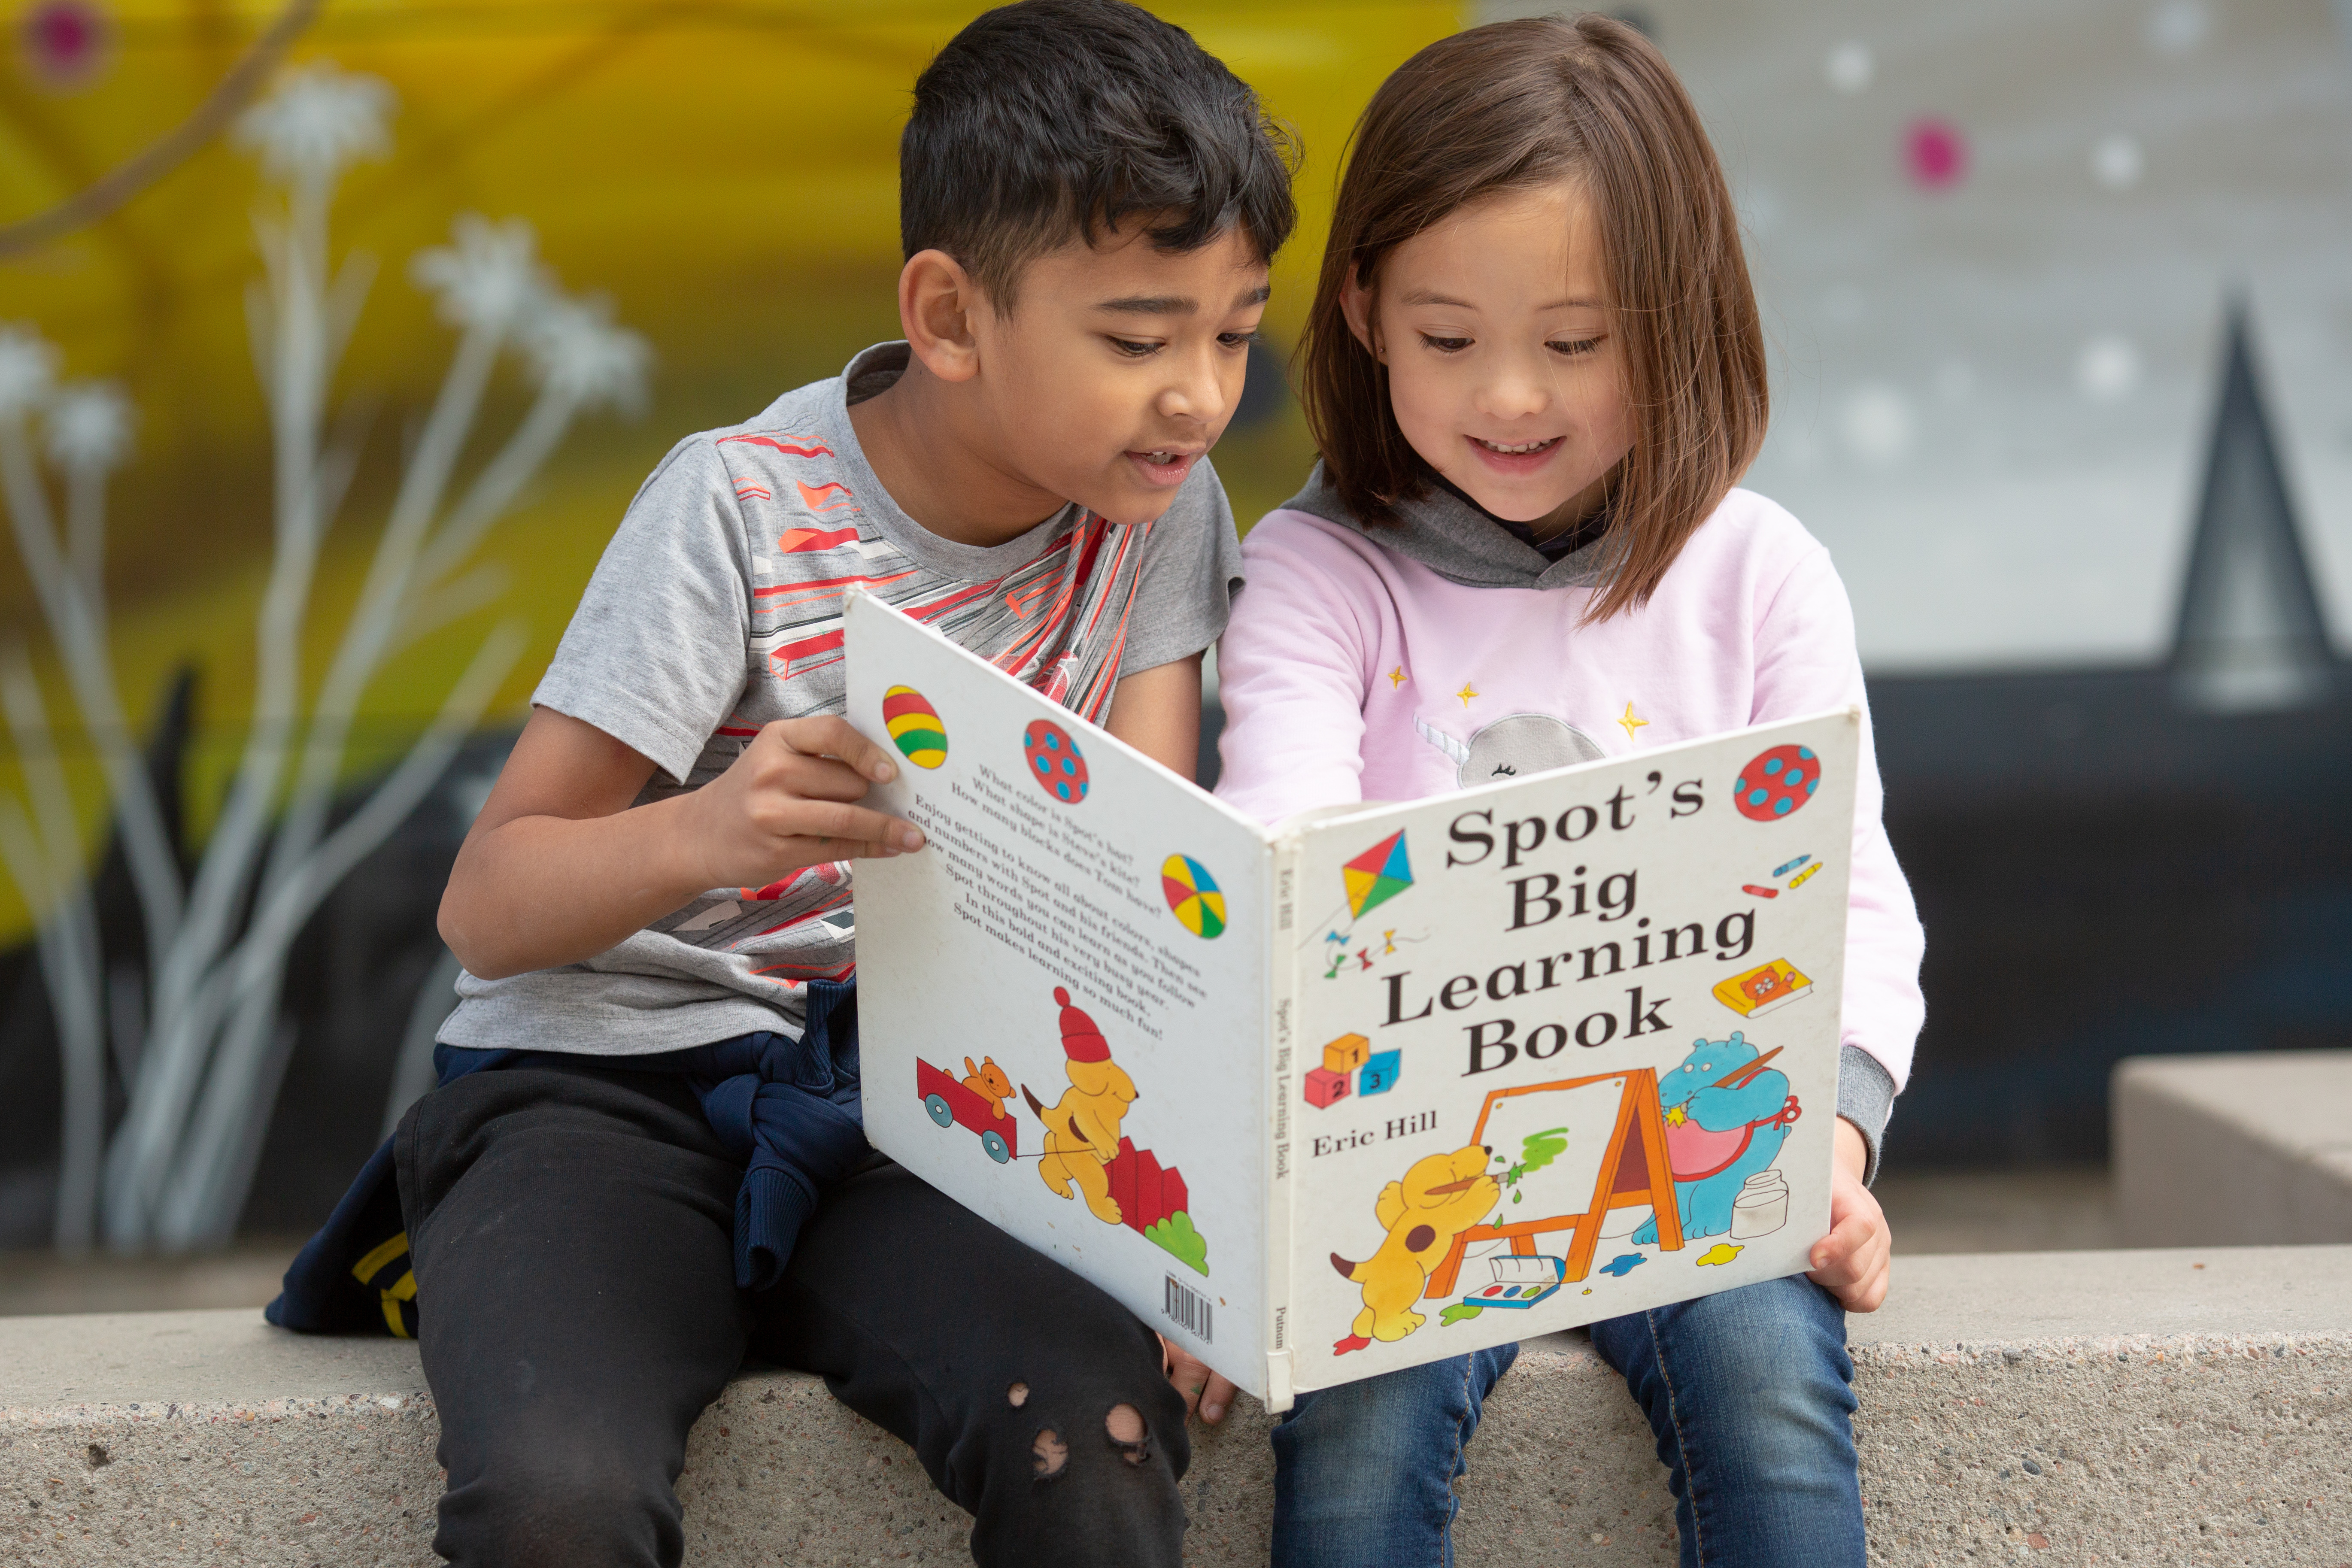 A young girl and boy sit together reading a book called “Spot’s Big Learning Book.”